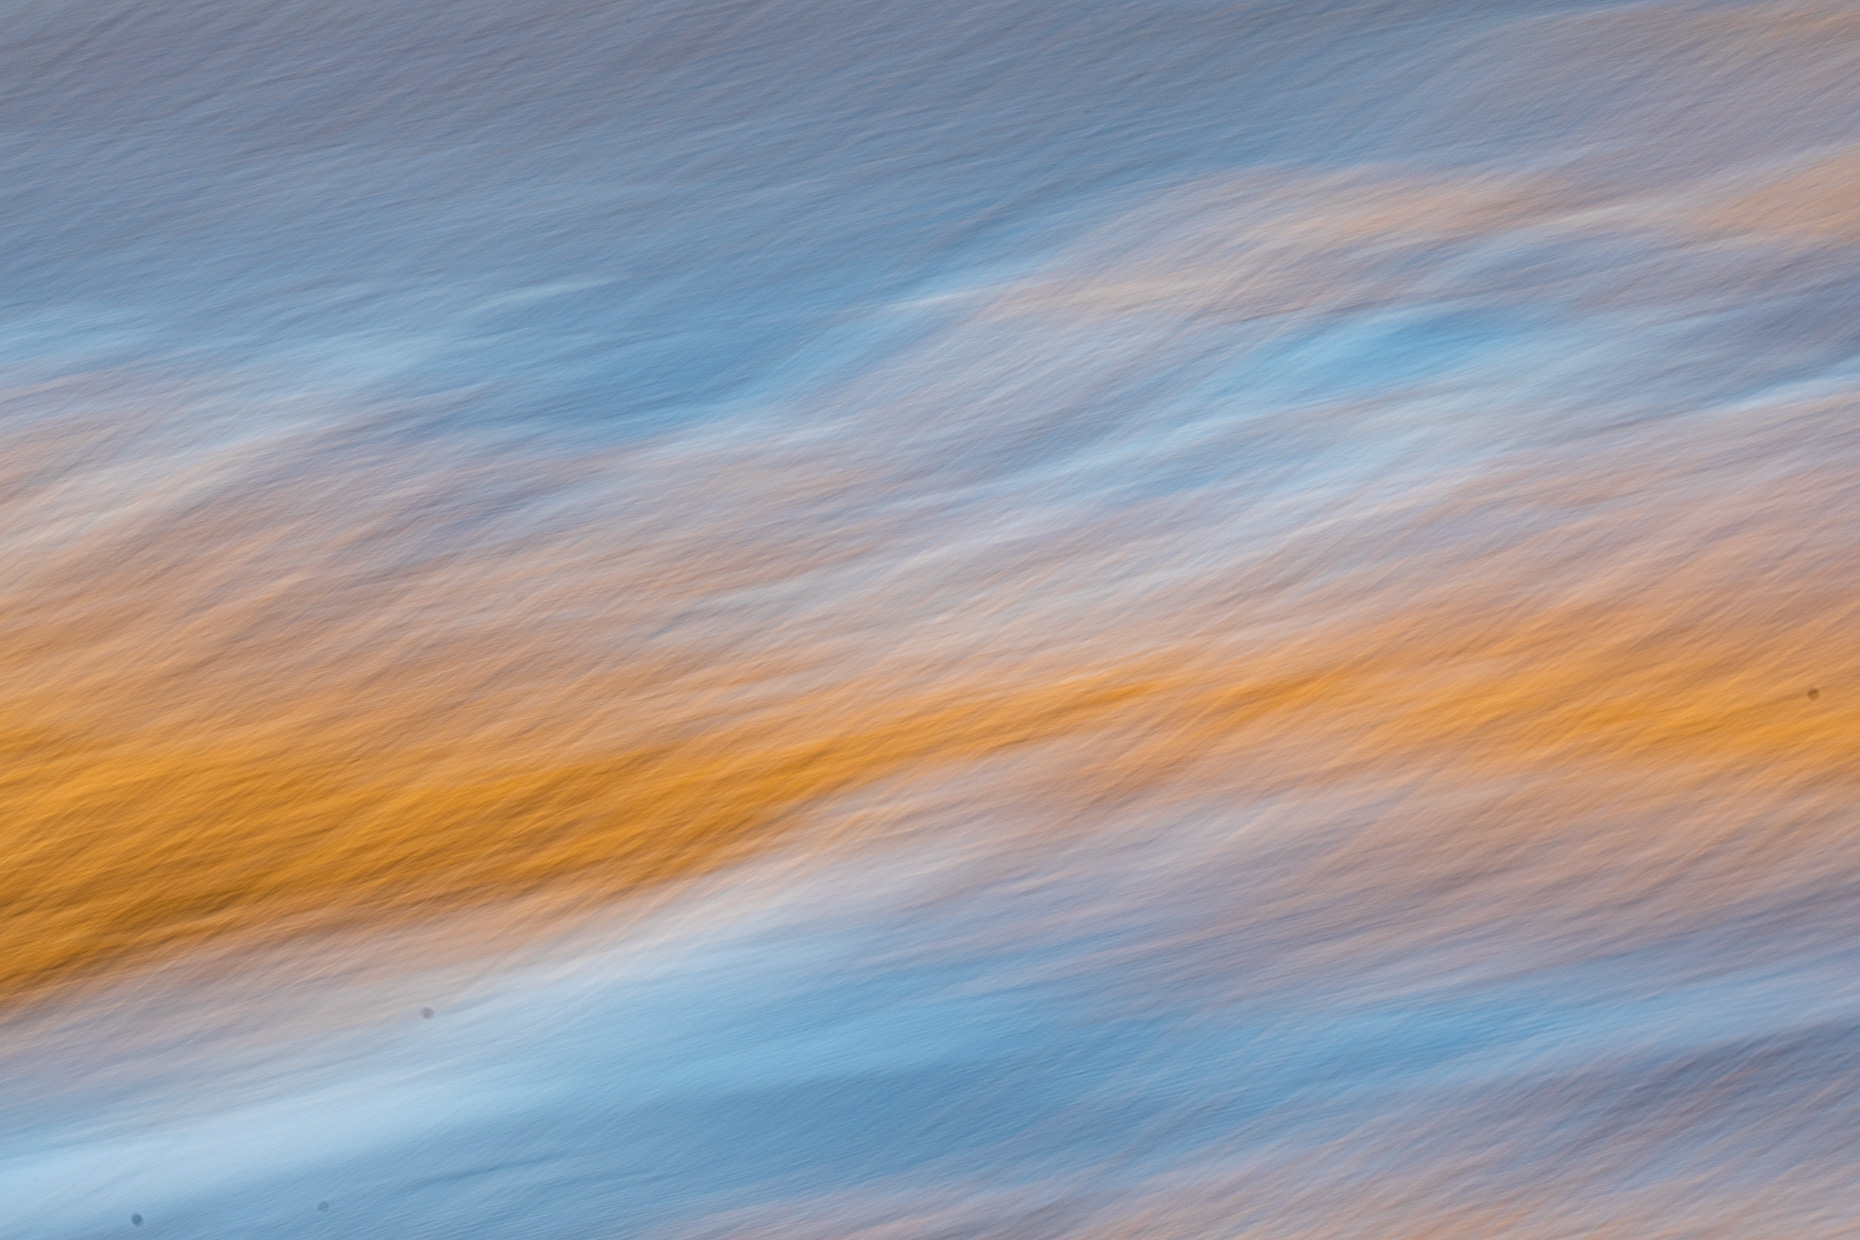 climate_change_winter_ice_Saint_Lawrence_River_Quebec_ICM_intentional_camera_movement-20